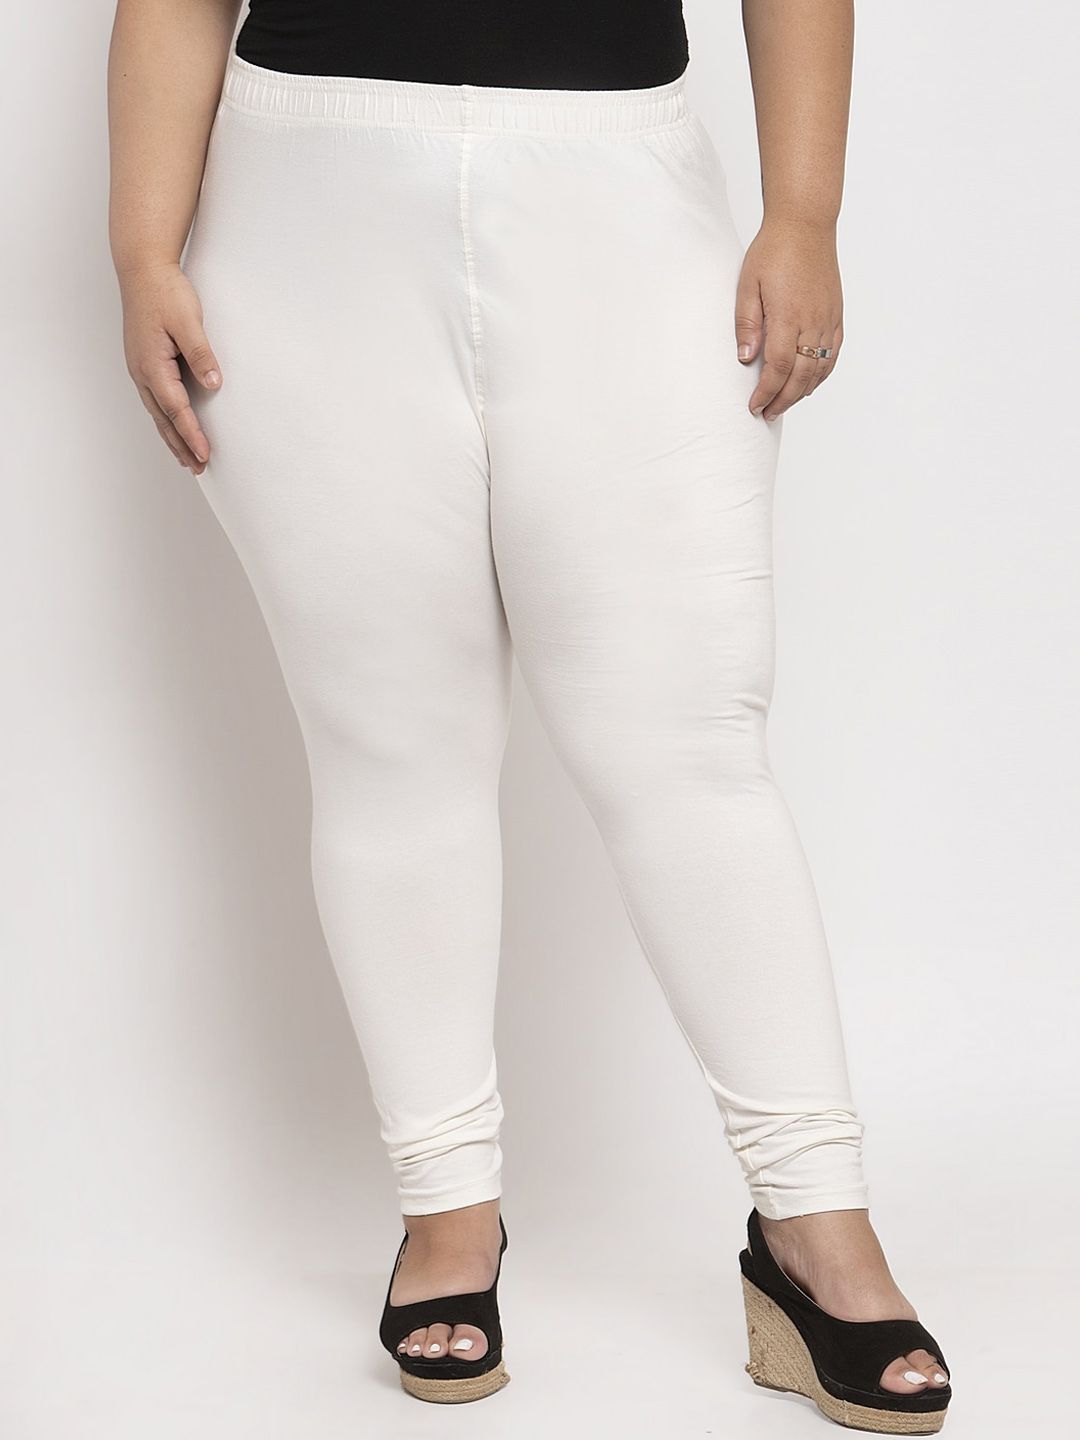 TAG 7 PLUS Women Plus Size Off White Solid Ankle-Length Leggings Price in India